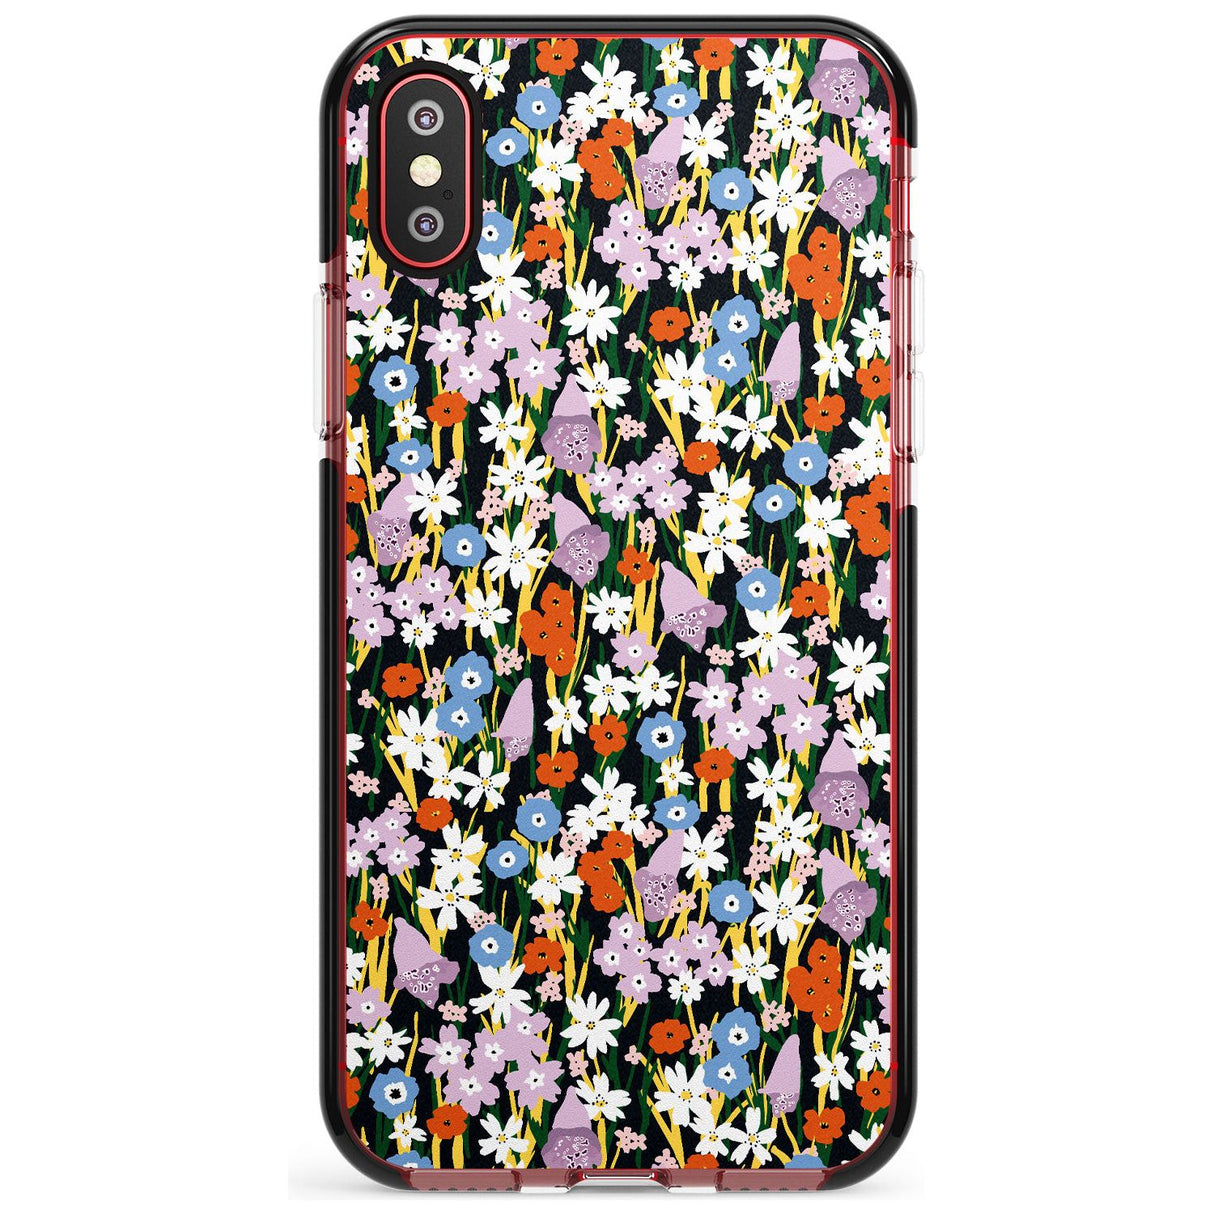 Energetic Floral Mix: Solid Pink Fade Impact Phone Case for iPhone X XS Max XR